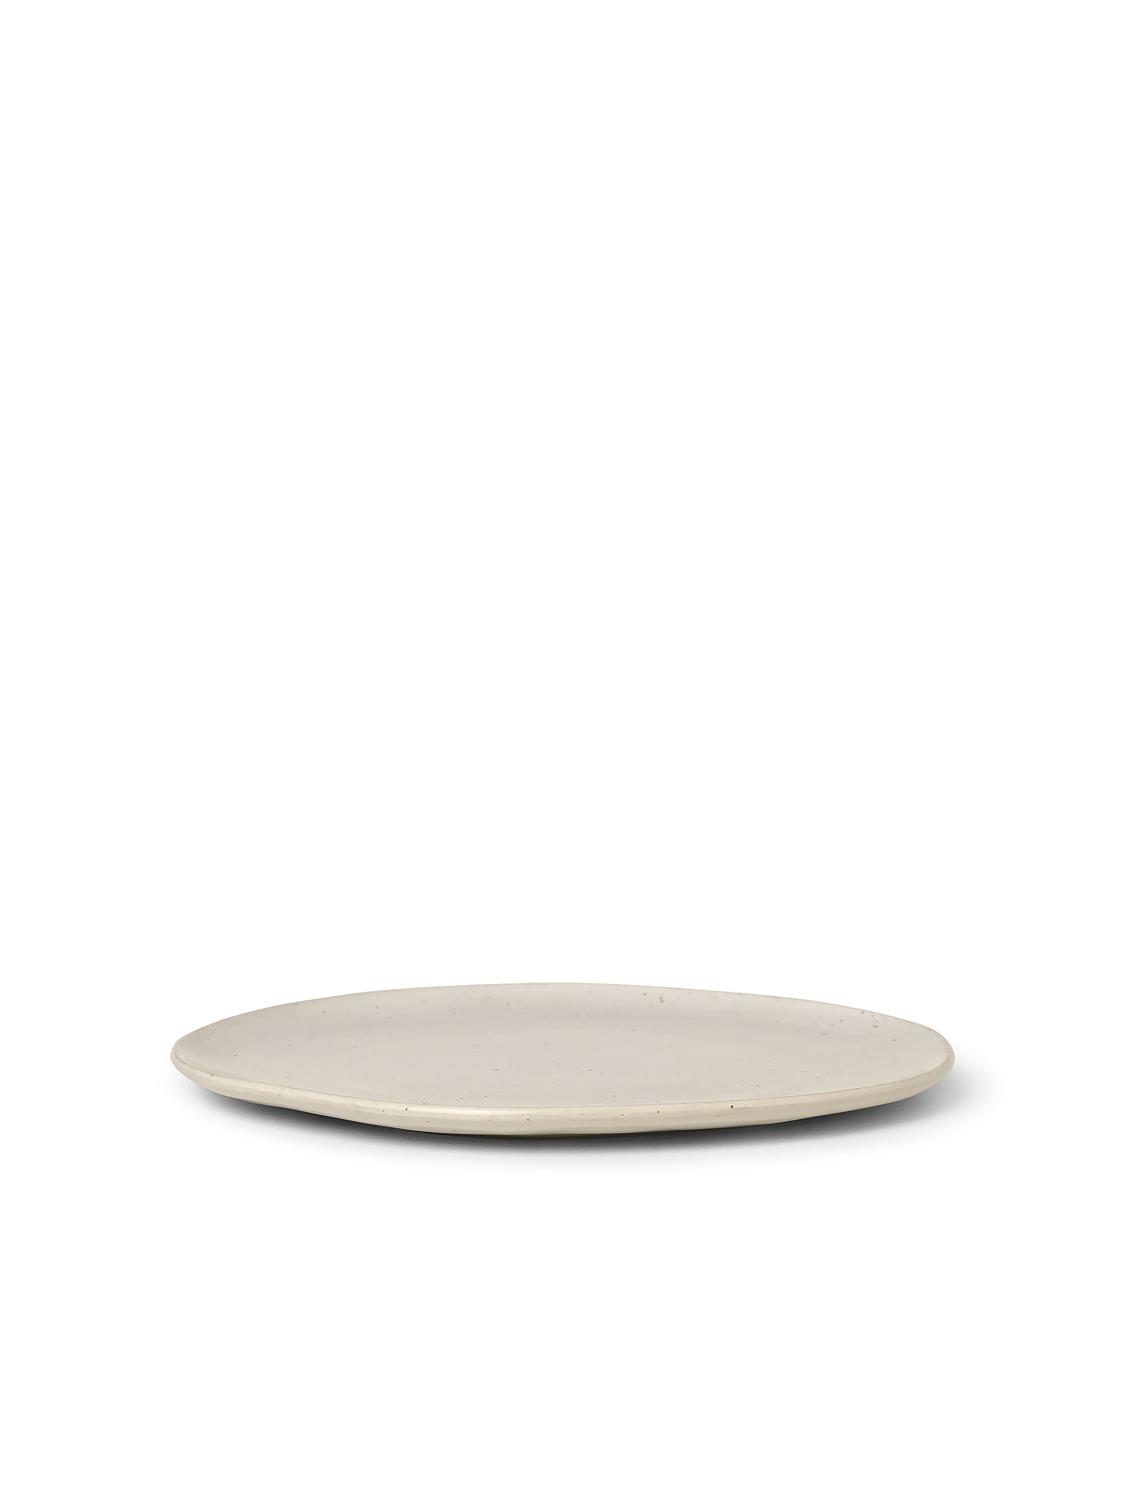 Ferm Living - Flow Plate - Off White Speckle - Large